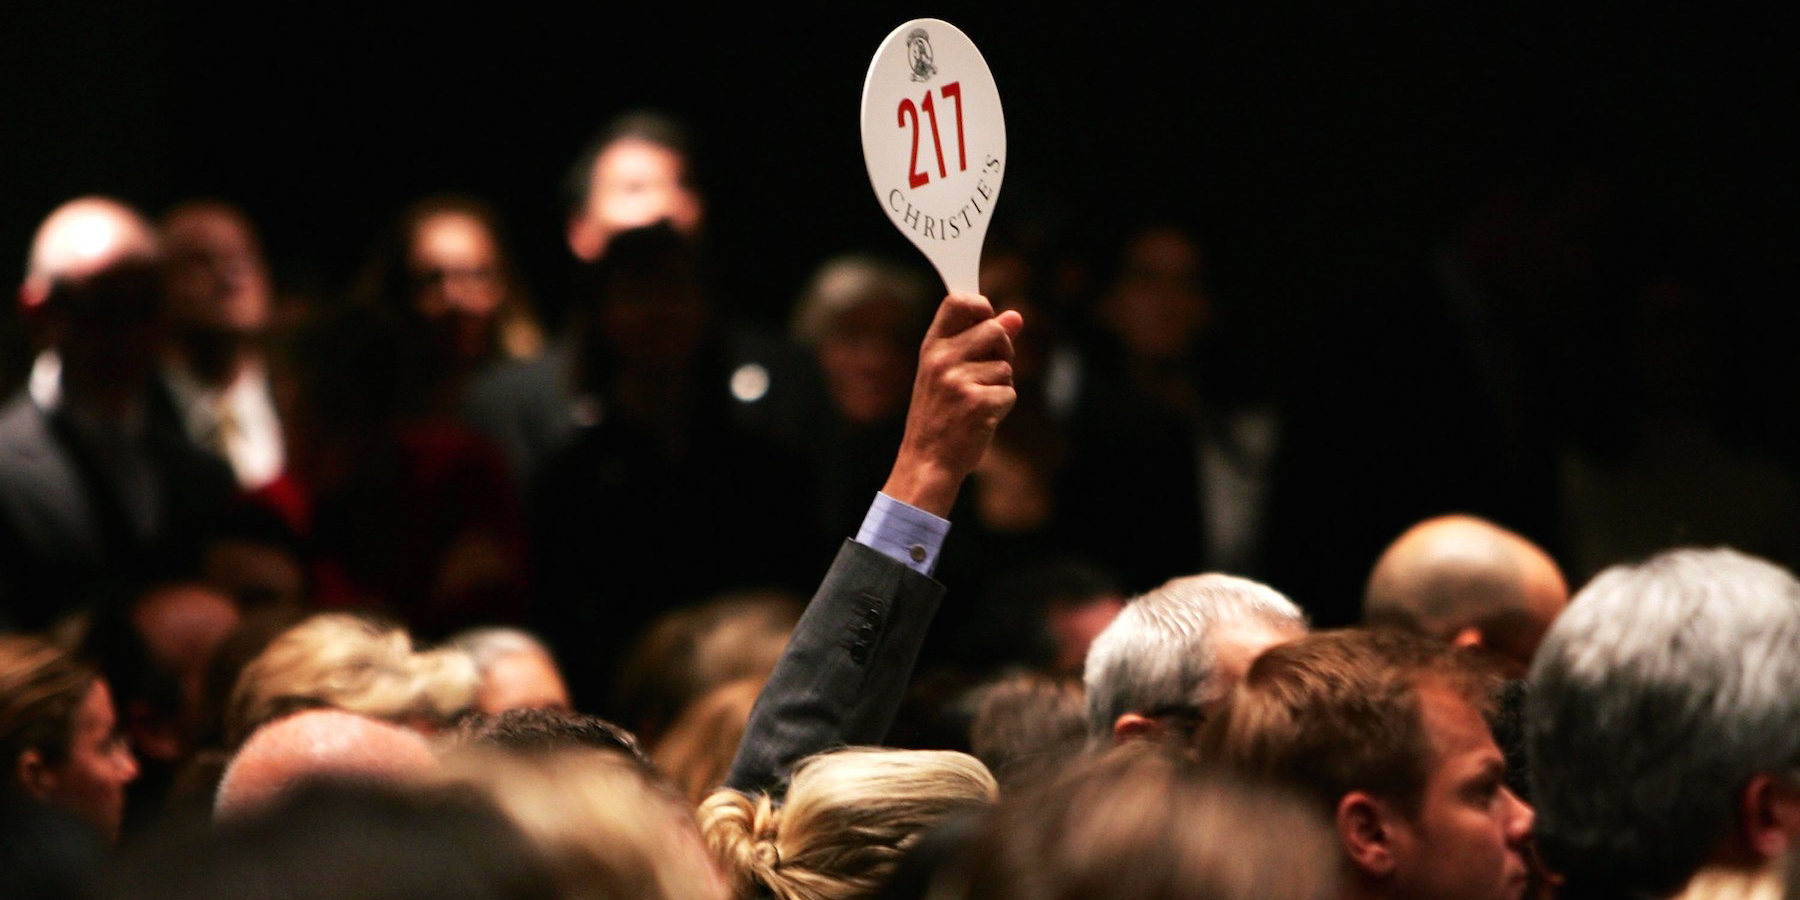 A man holds his hand up while bidding on a work of art inside the auction house Christie's during the Post-War and contemporary Art sale November 15, 2006 in New York City. Christie's estimates that works by Warhol, Willem de Kooning, Roy Lichtenstein and others could go for up to $220 million in what the auction house says may be the most valuable post-World War II and contemporary art auction in history. Warhol's 'Mao' portrait from 1972 went for over 17 million, setting an all time record for the artist. (Photo by )